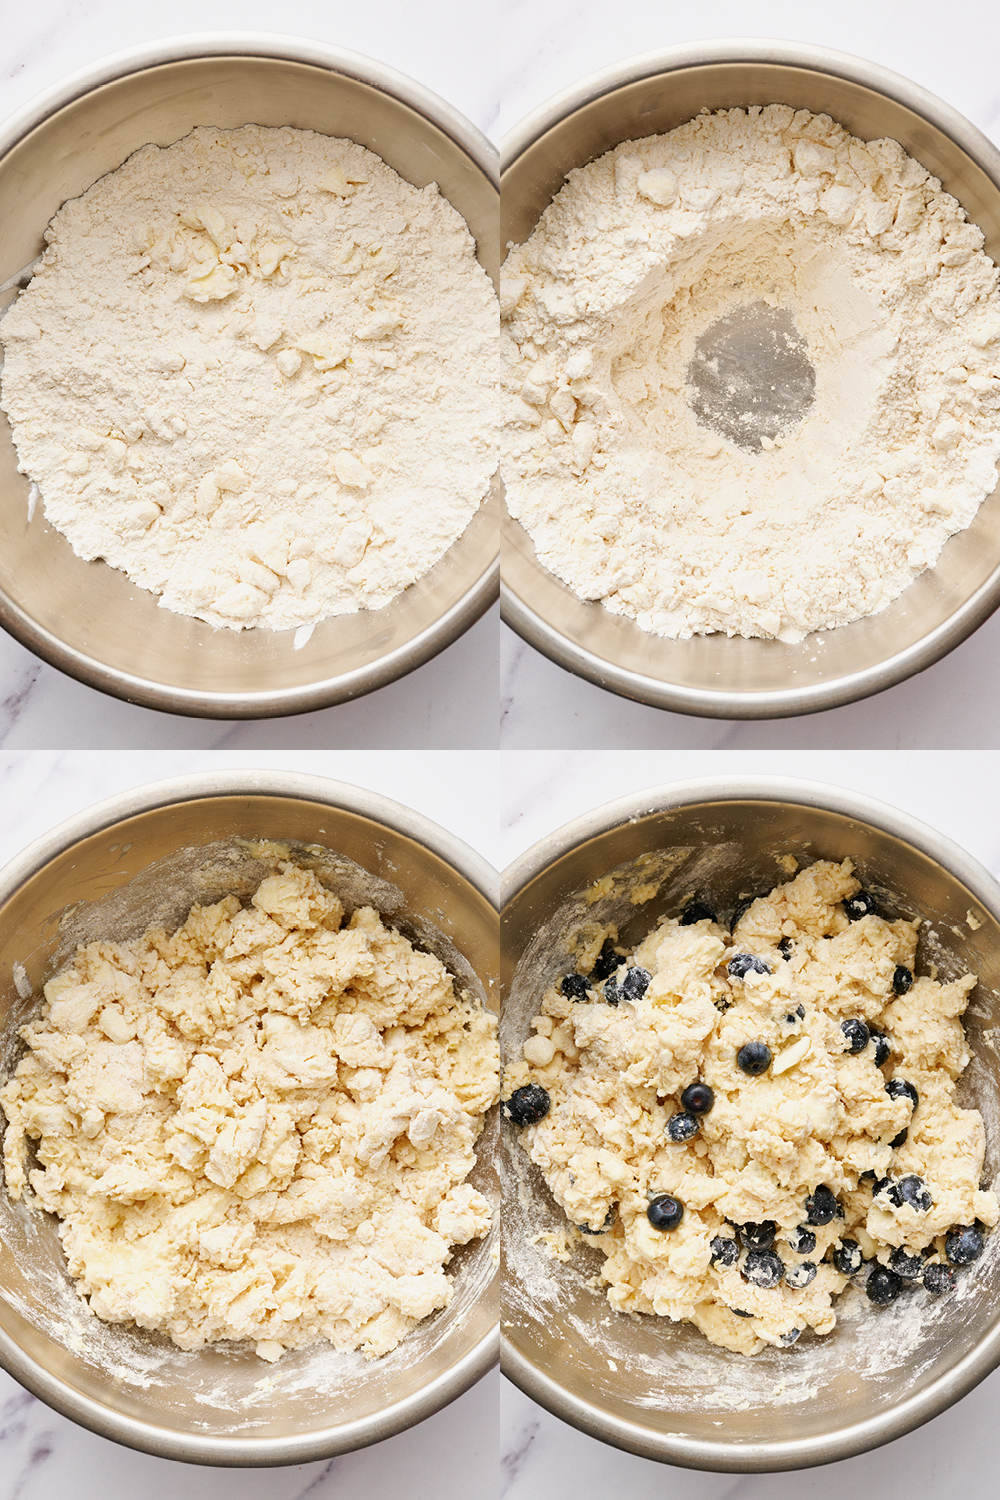 four bowls: one with flour mixture with the butter cut in, then with a well in the center ready for the liquid, then the mixed dough, and finally the blueberries are added